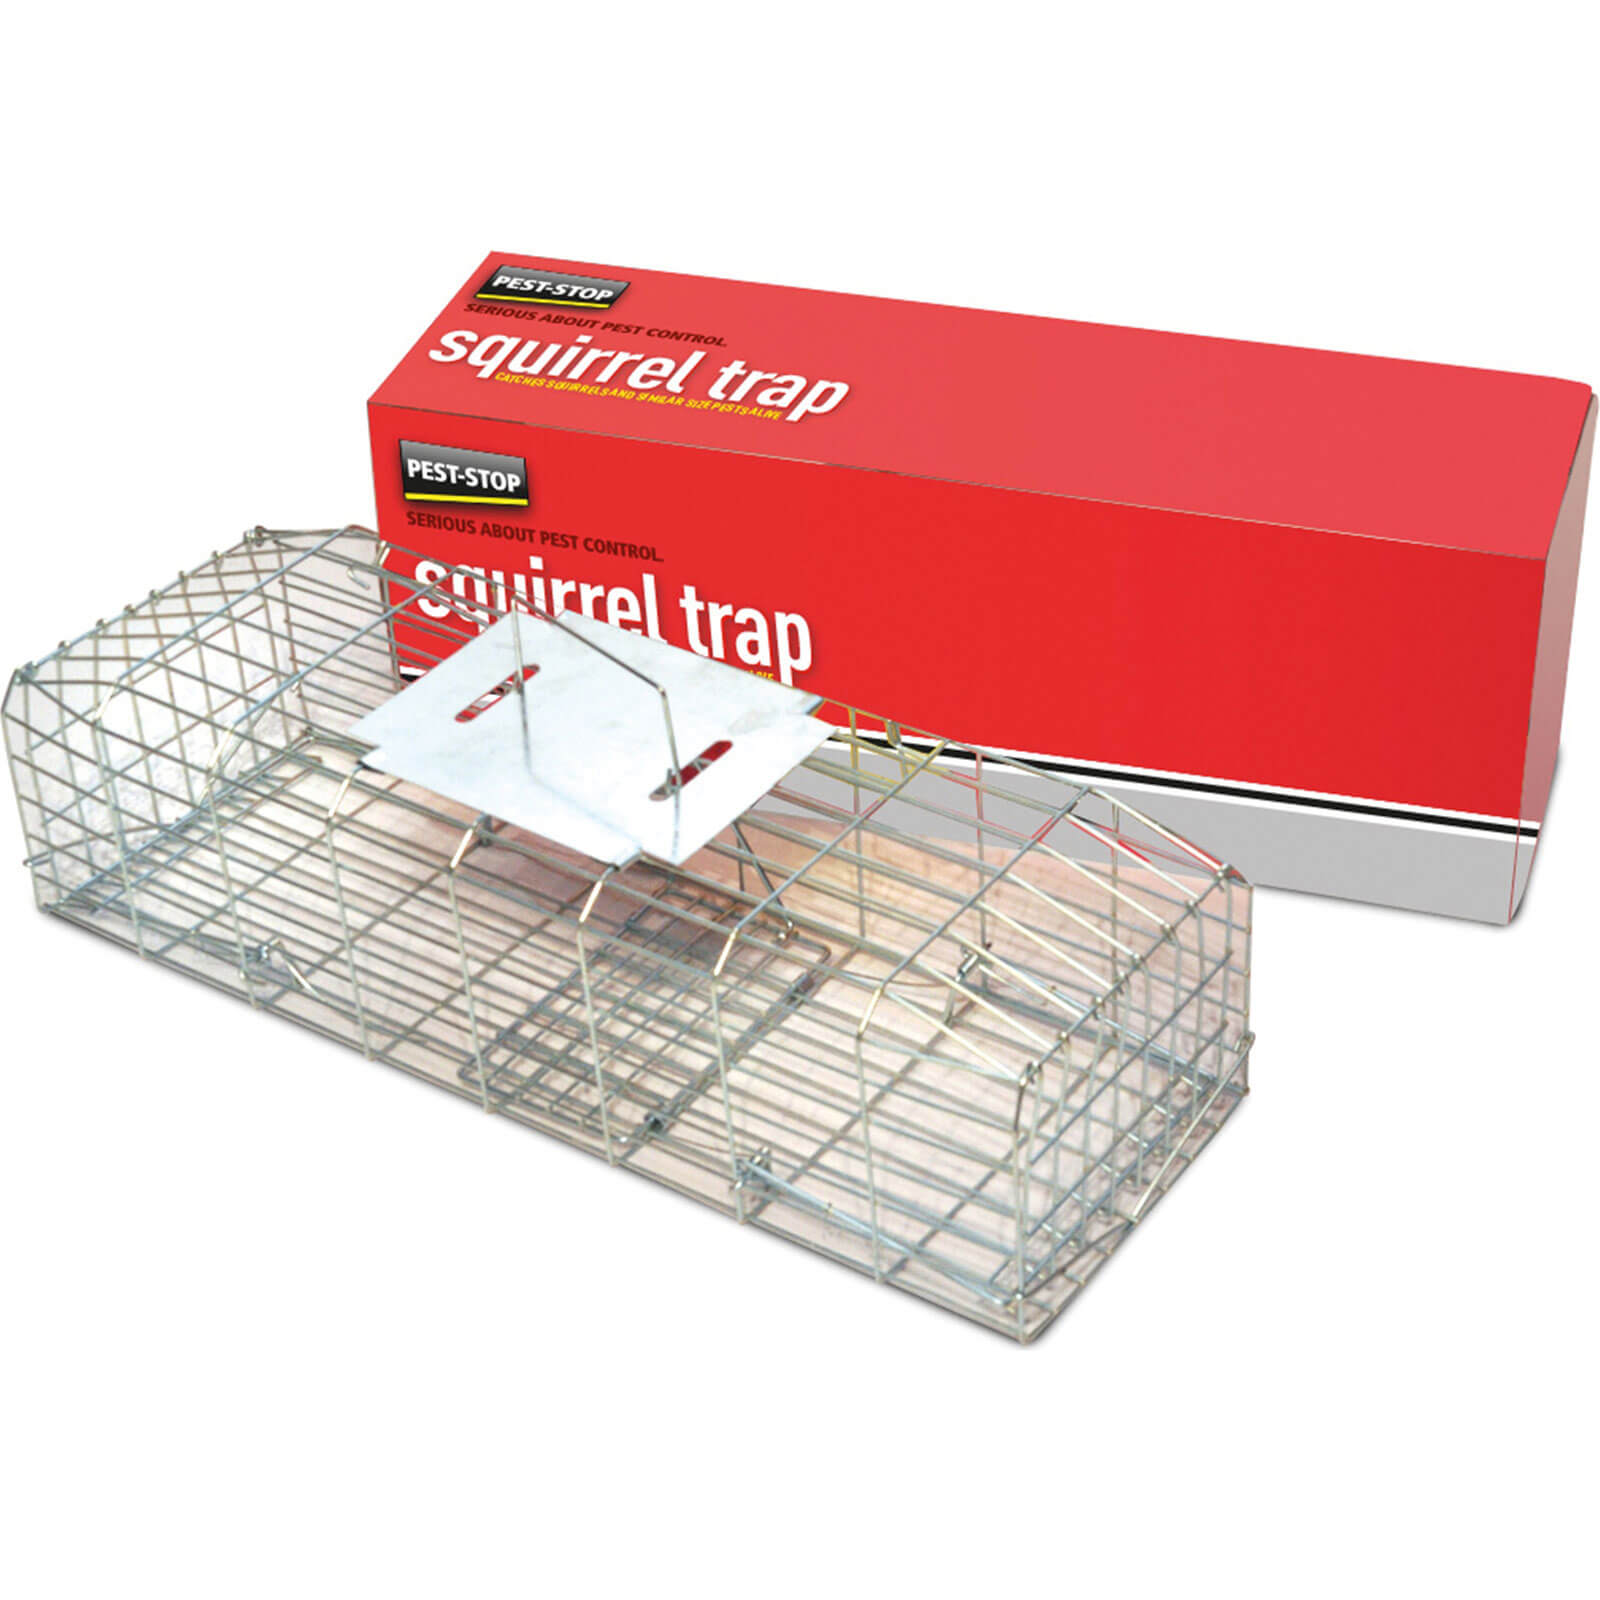 Image of Proctor Brothers Squirrel Trap